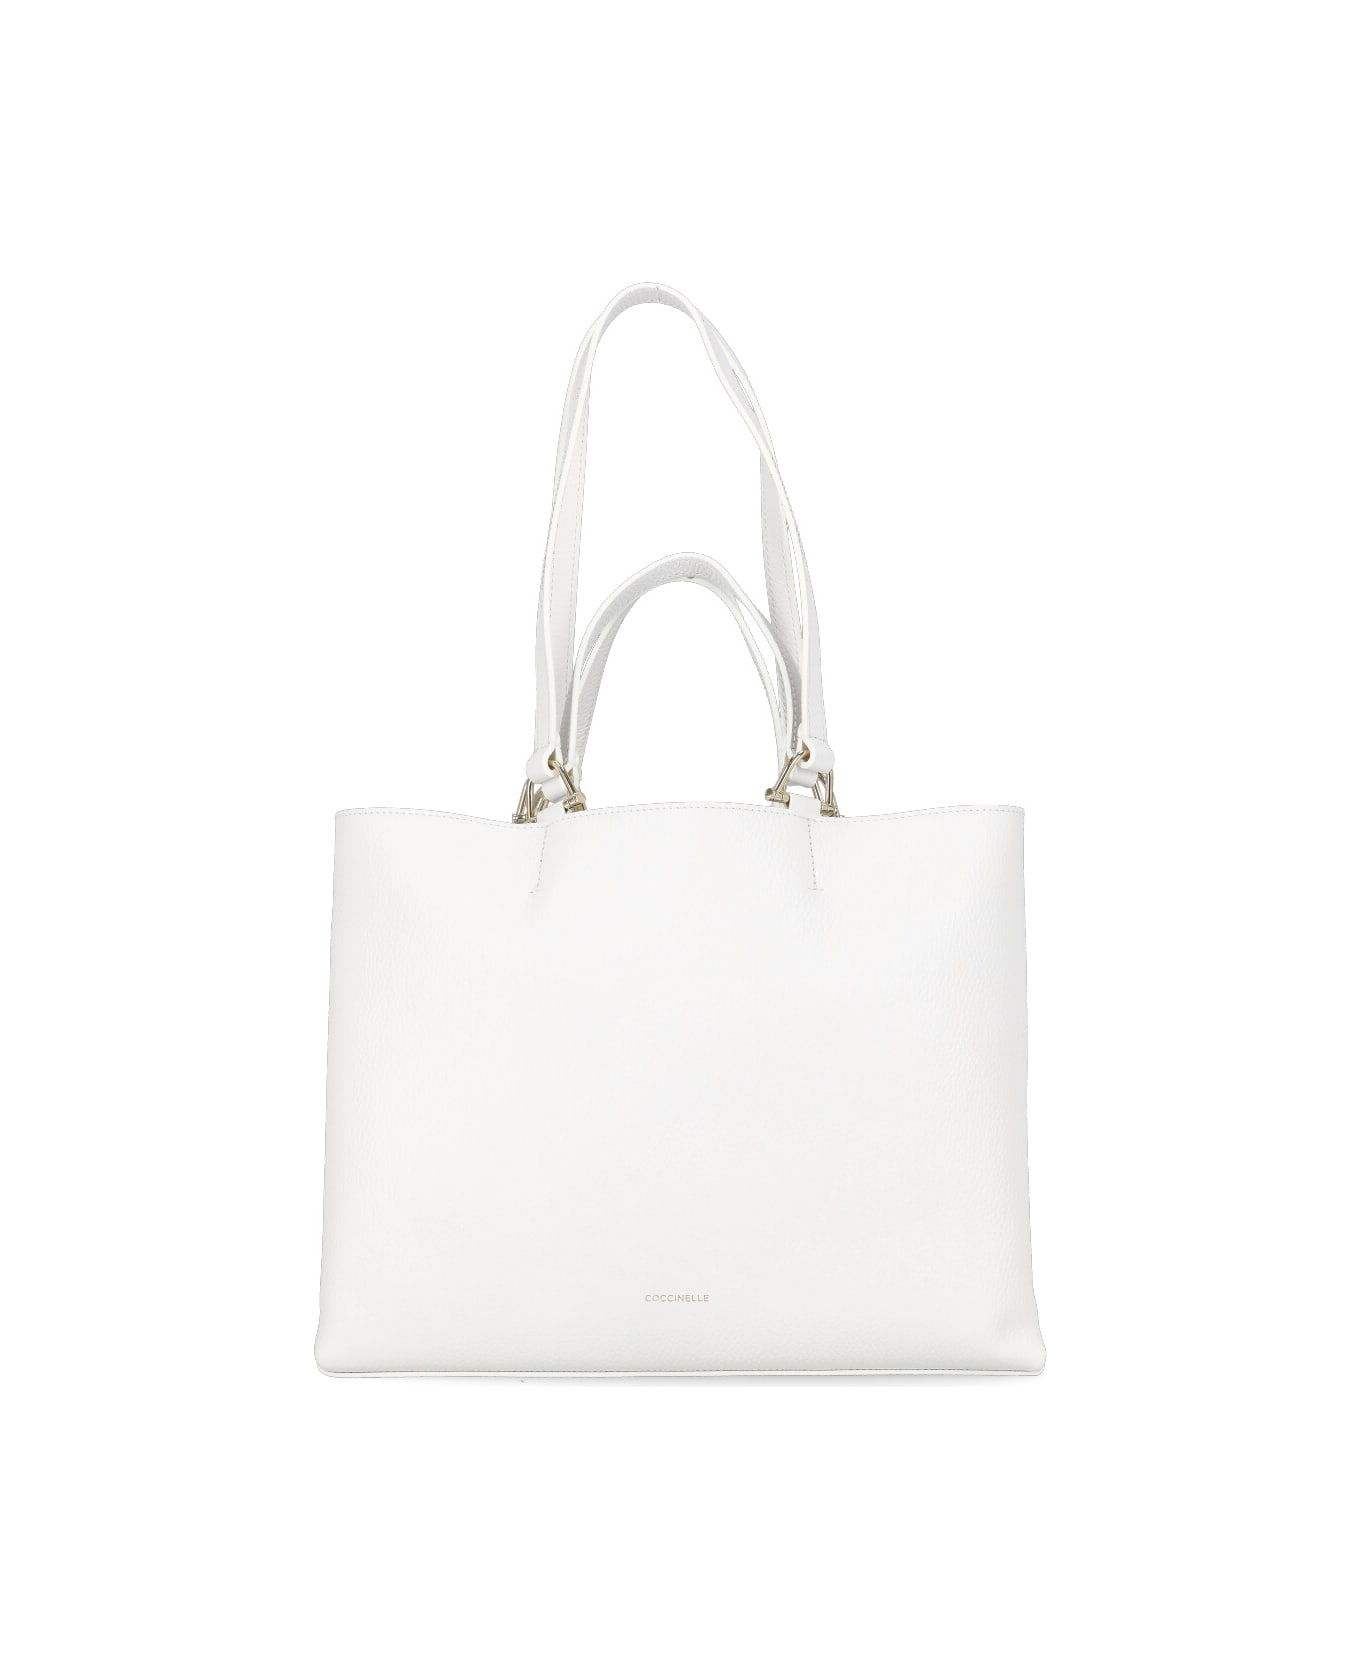 Coccinelle Hop On Bag - White トートバッグ